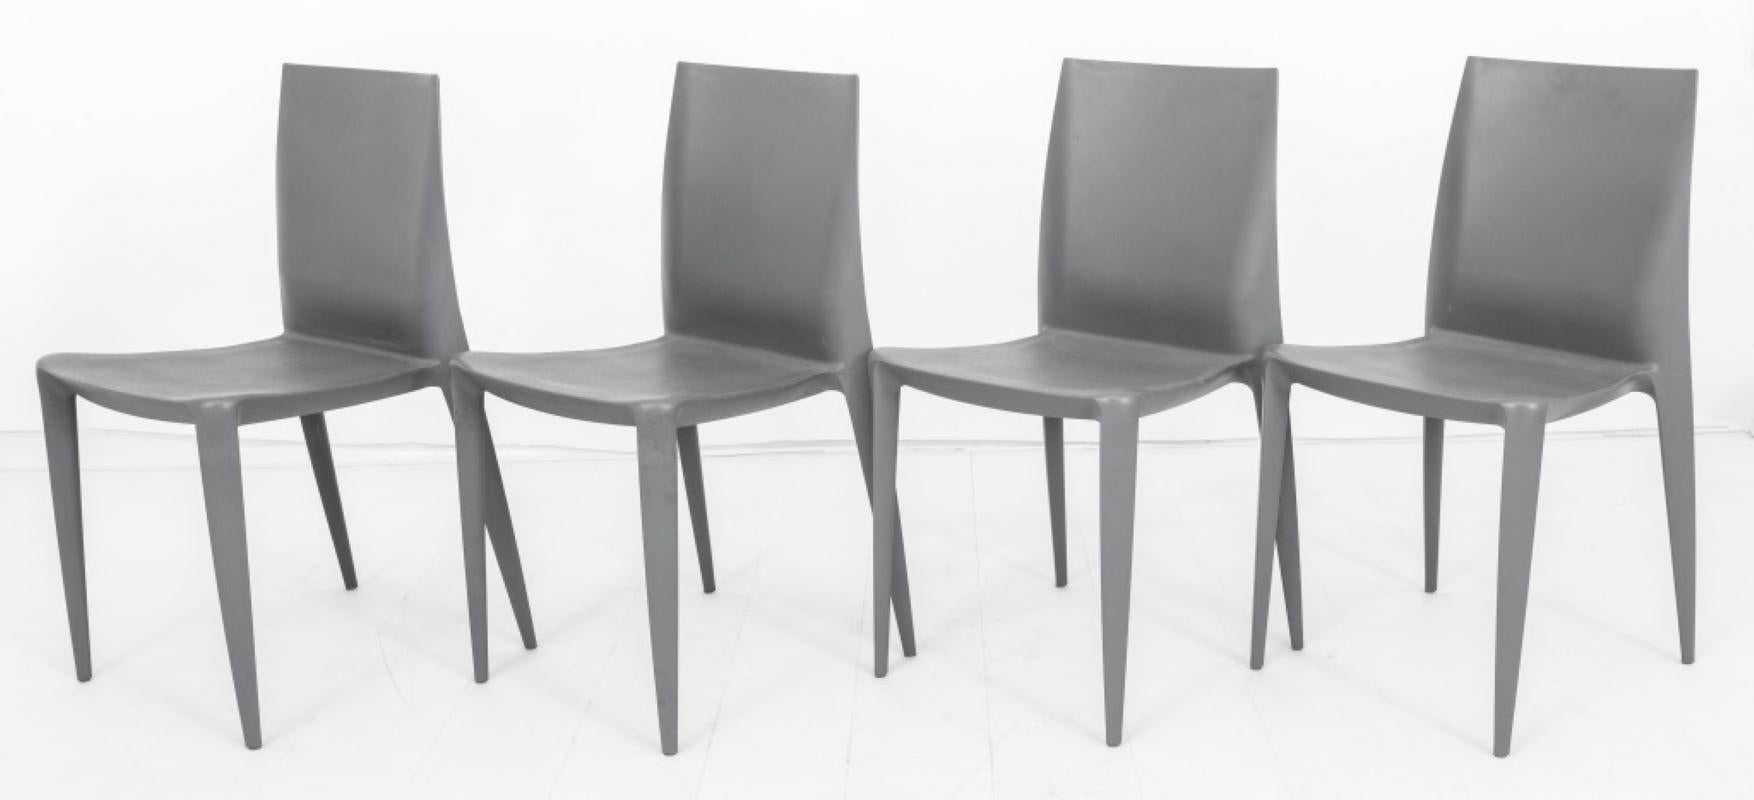 Mario Bellini (Italian, b. 1935) for Heller set of four 'Bellini' dining chairs, circa 1998, grey injection moulded polypropylene, makers mark on bottom. 33